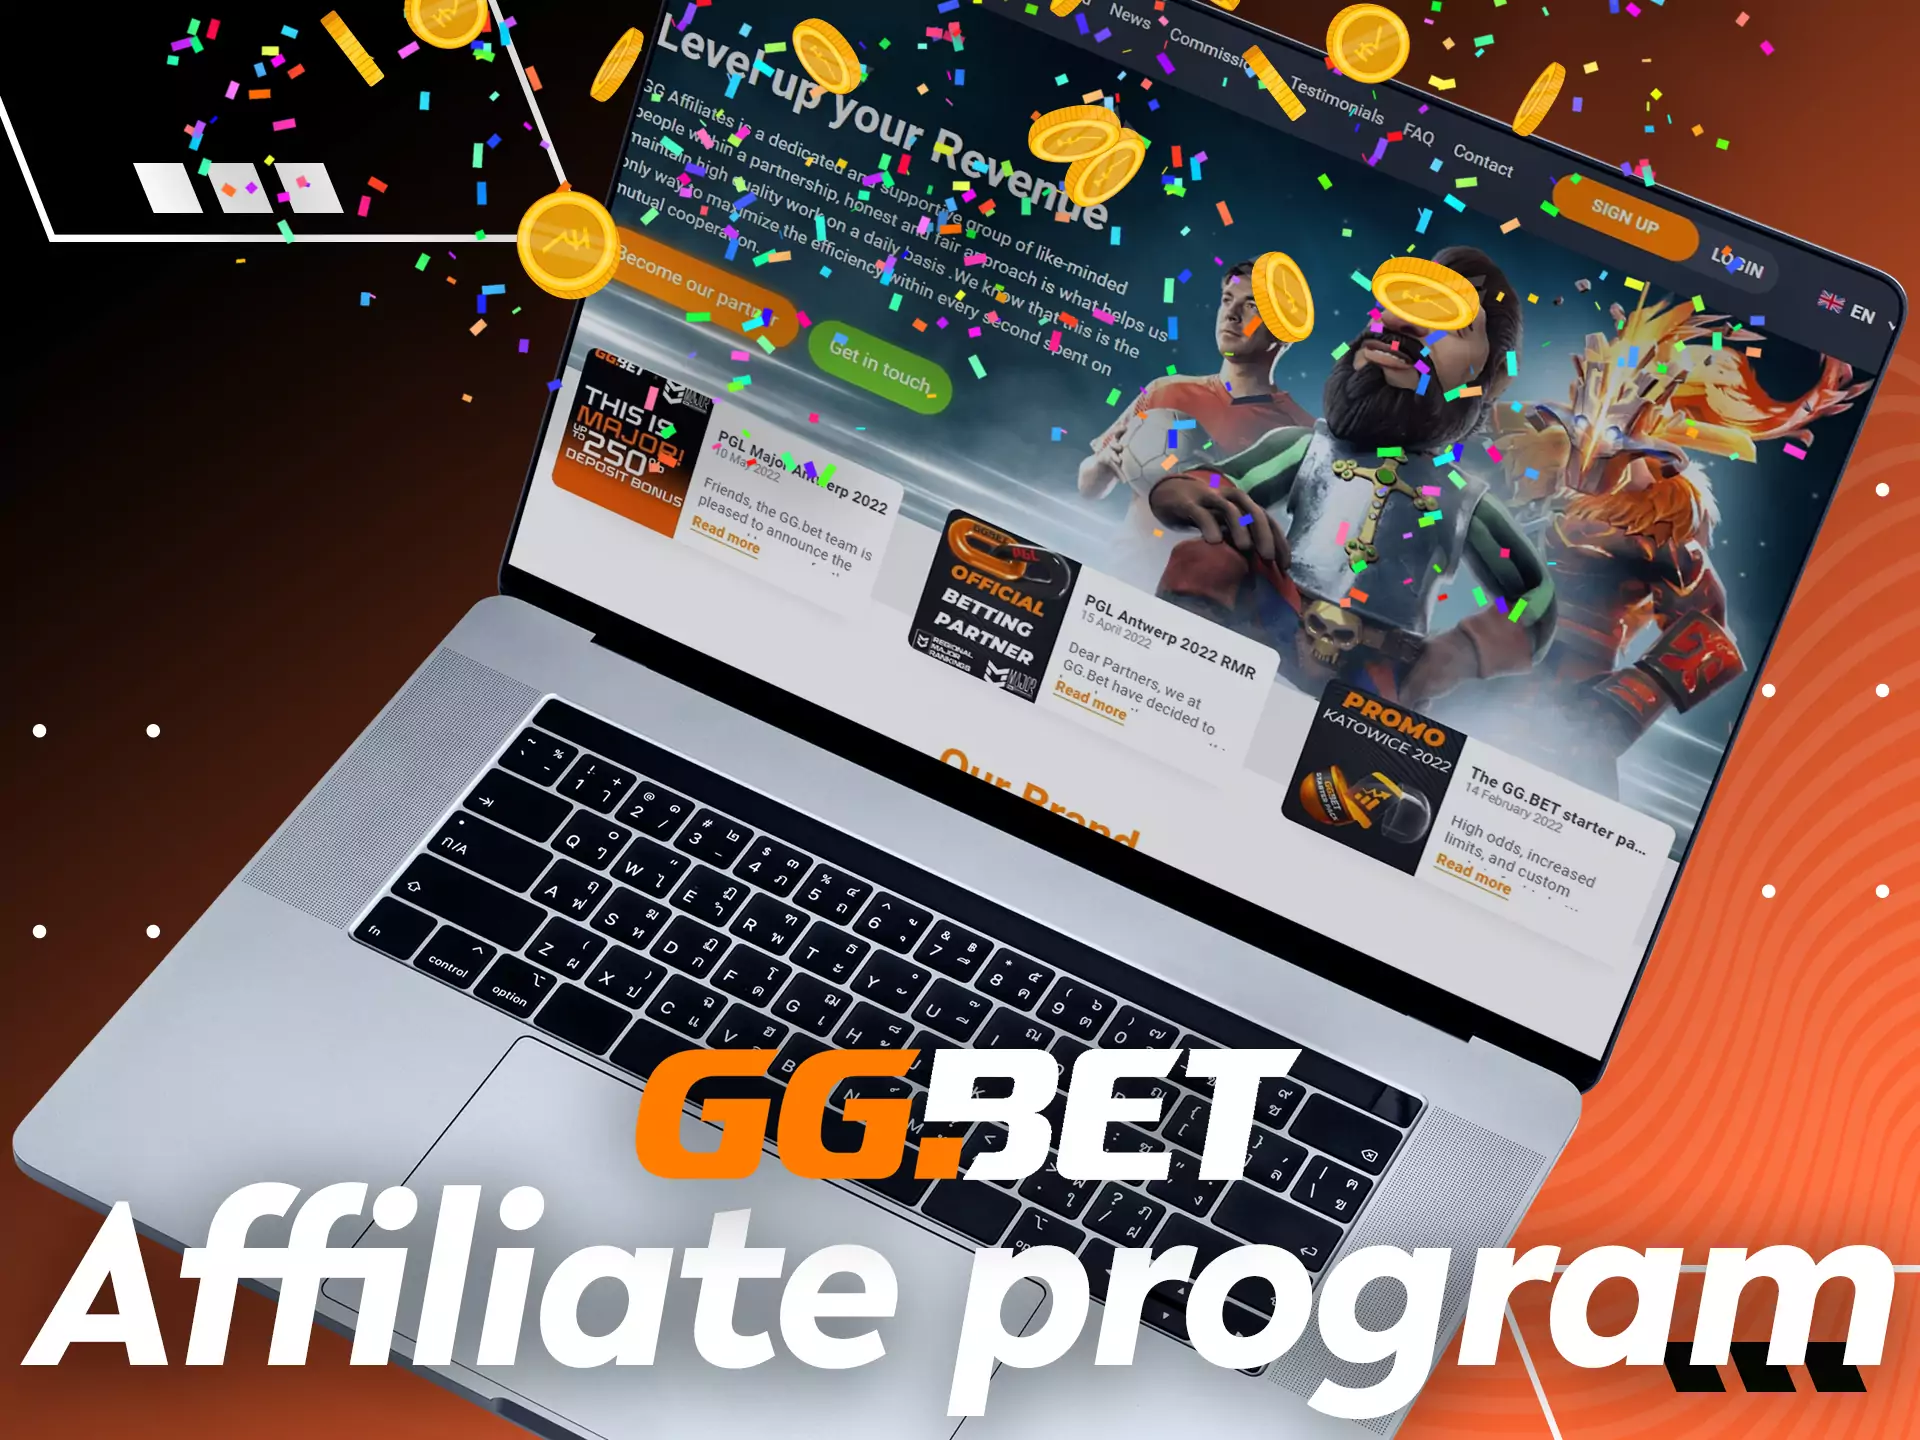 Join the GGBet affiliate program and get bonuses for inviting friends.